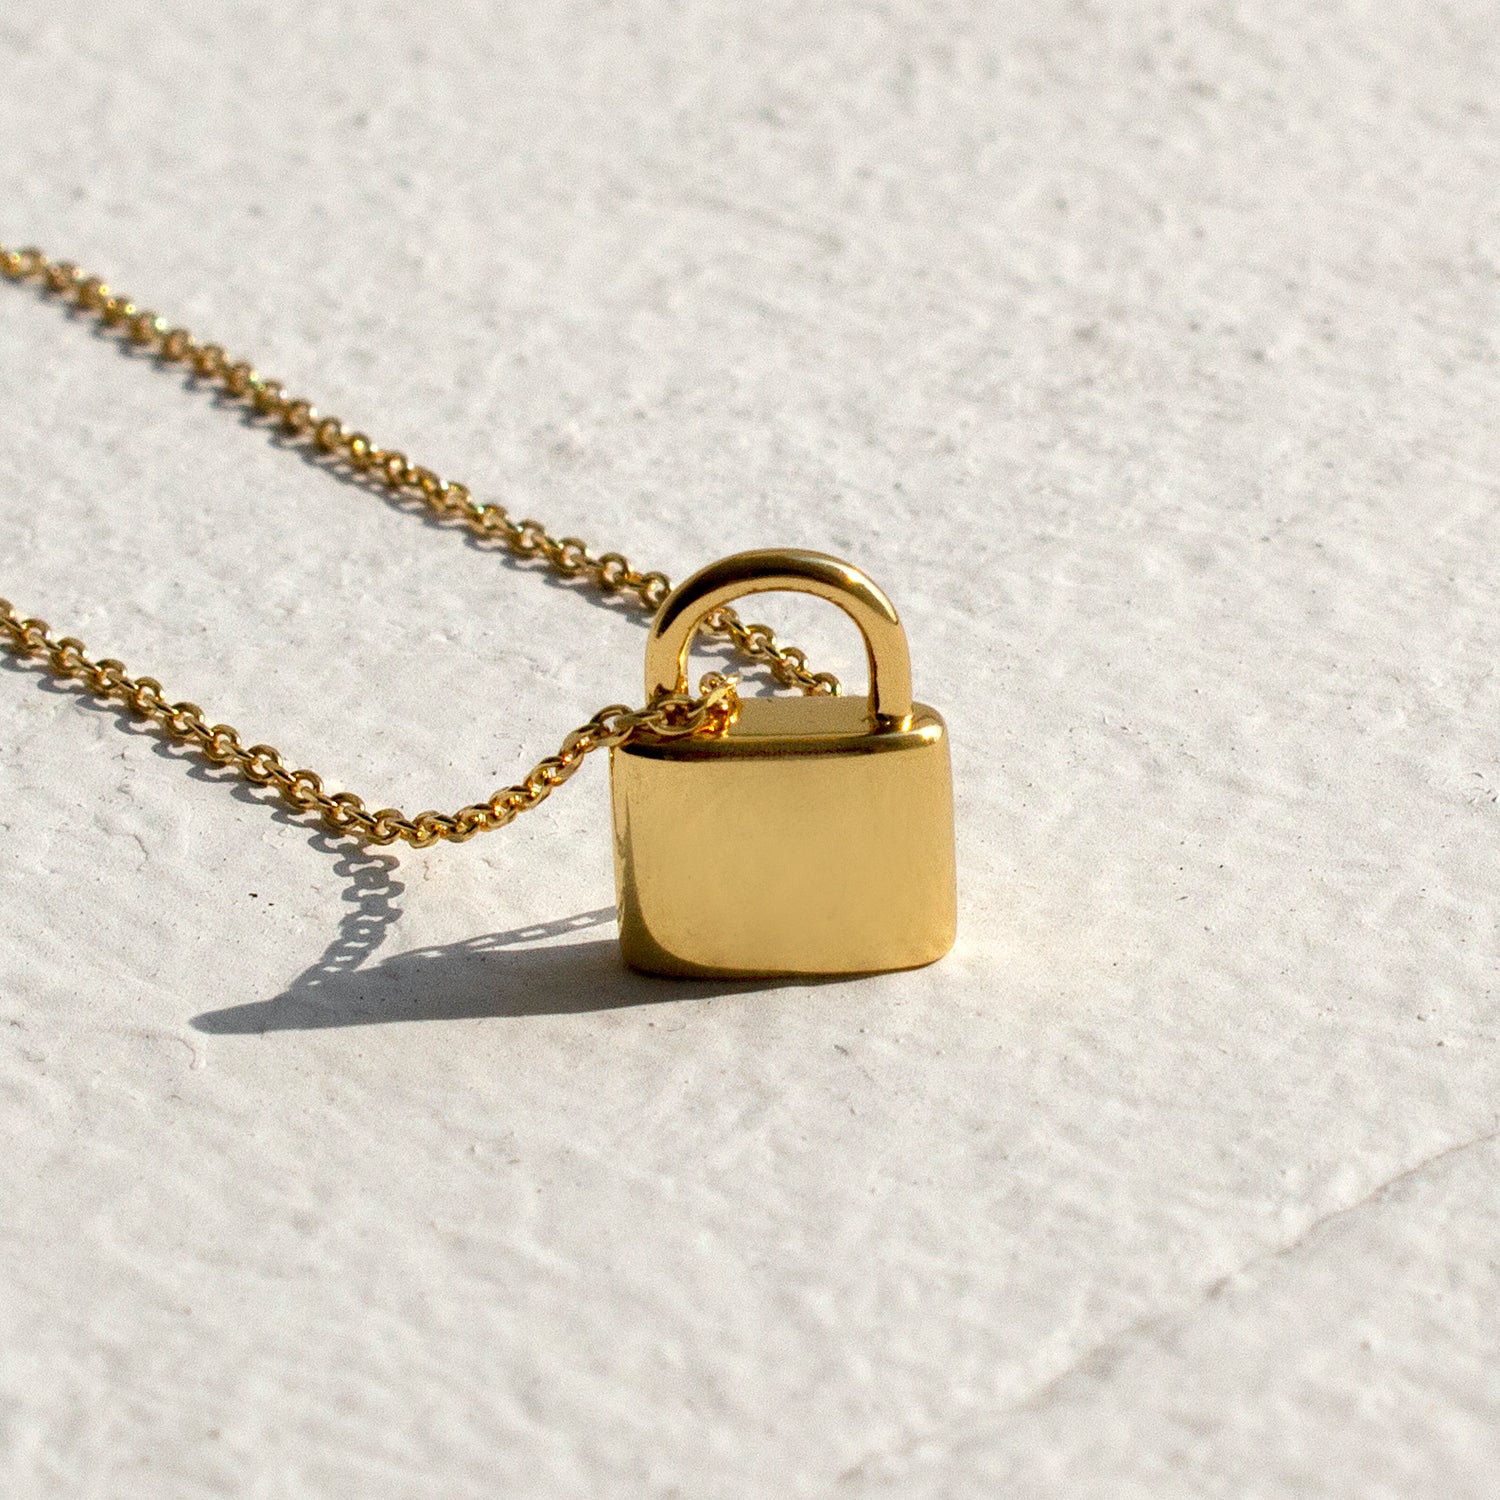 Gold Lock Necklace, Gold Padlock Necklace, Lock Jewelry, Padlock Jewelry,  Lock and Key, 14k Gold Filled Necklace, Dainty Gold Necklace